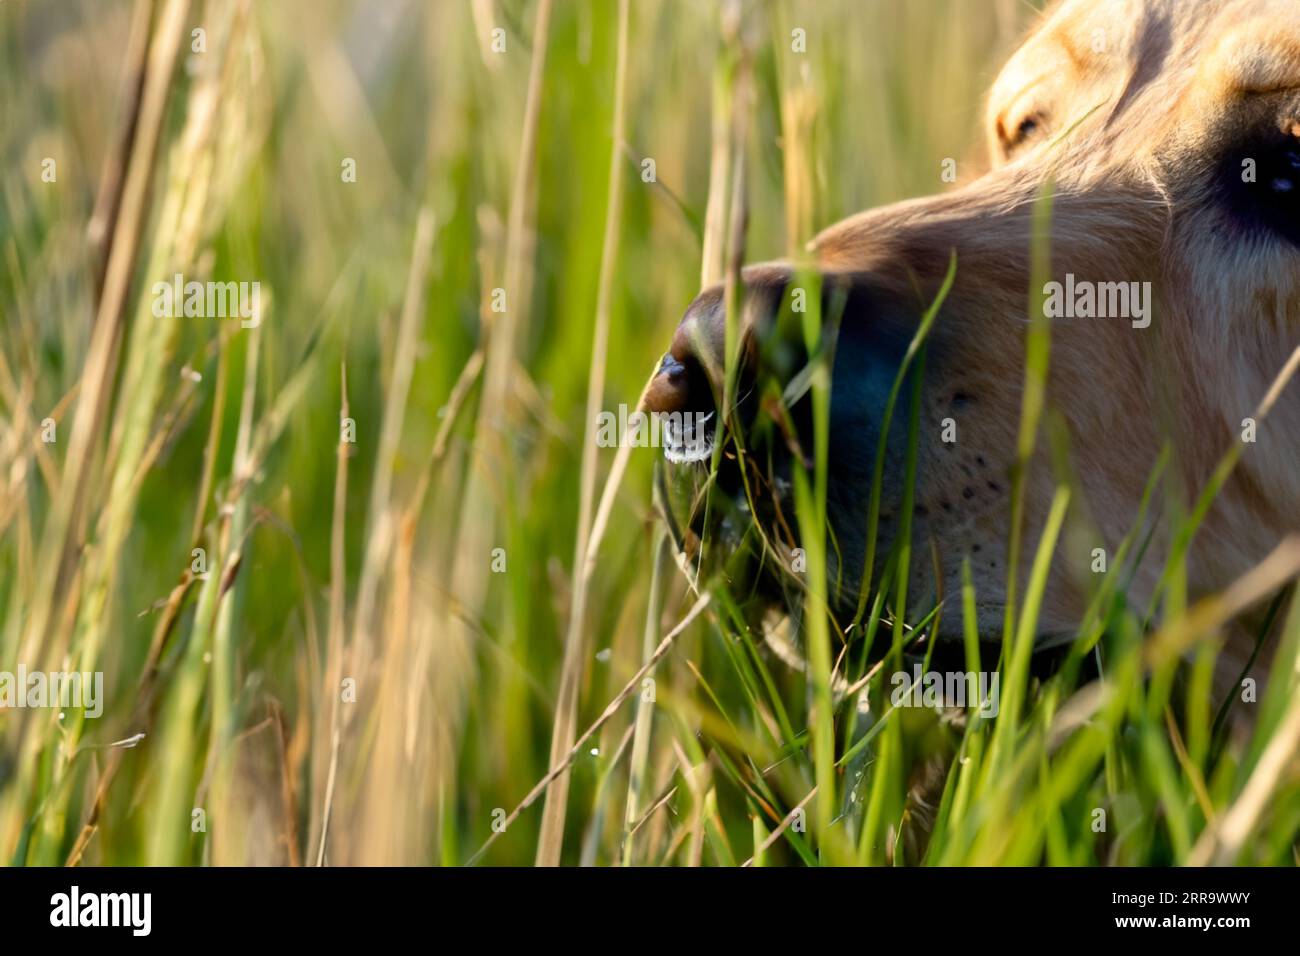 portrait of labrador dog in field of tall grass Stock Photo